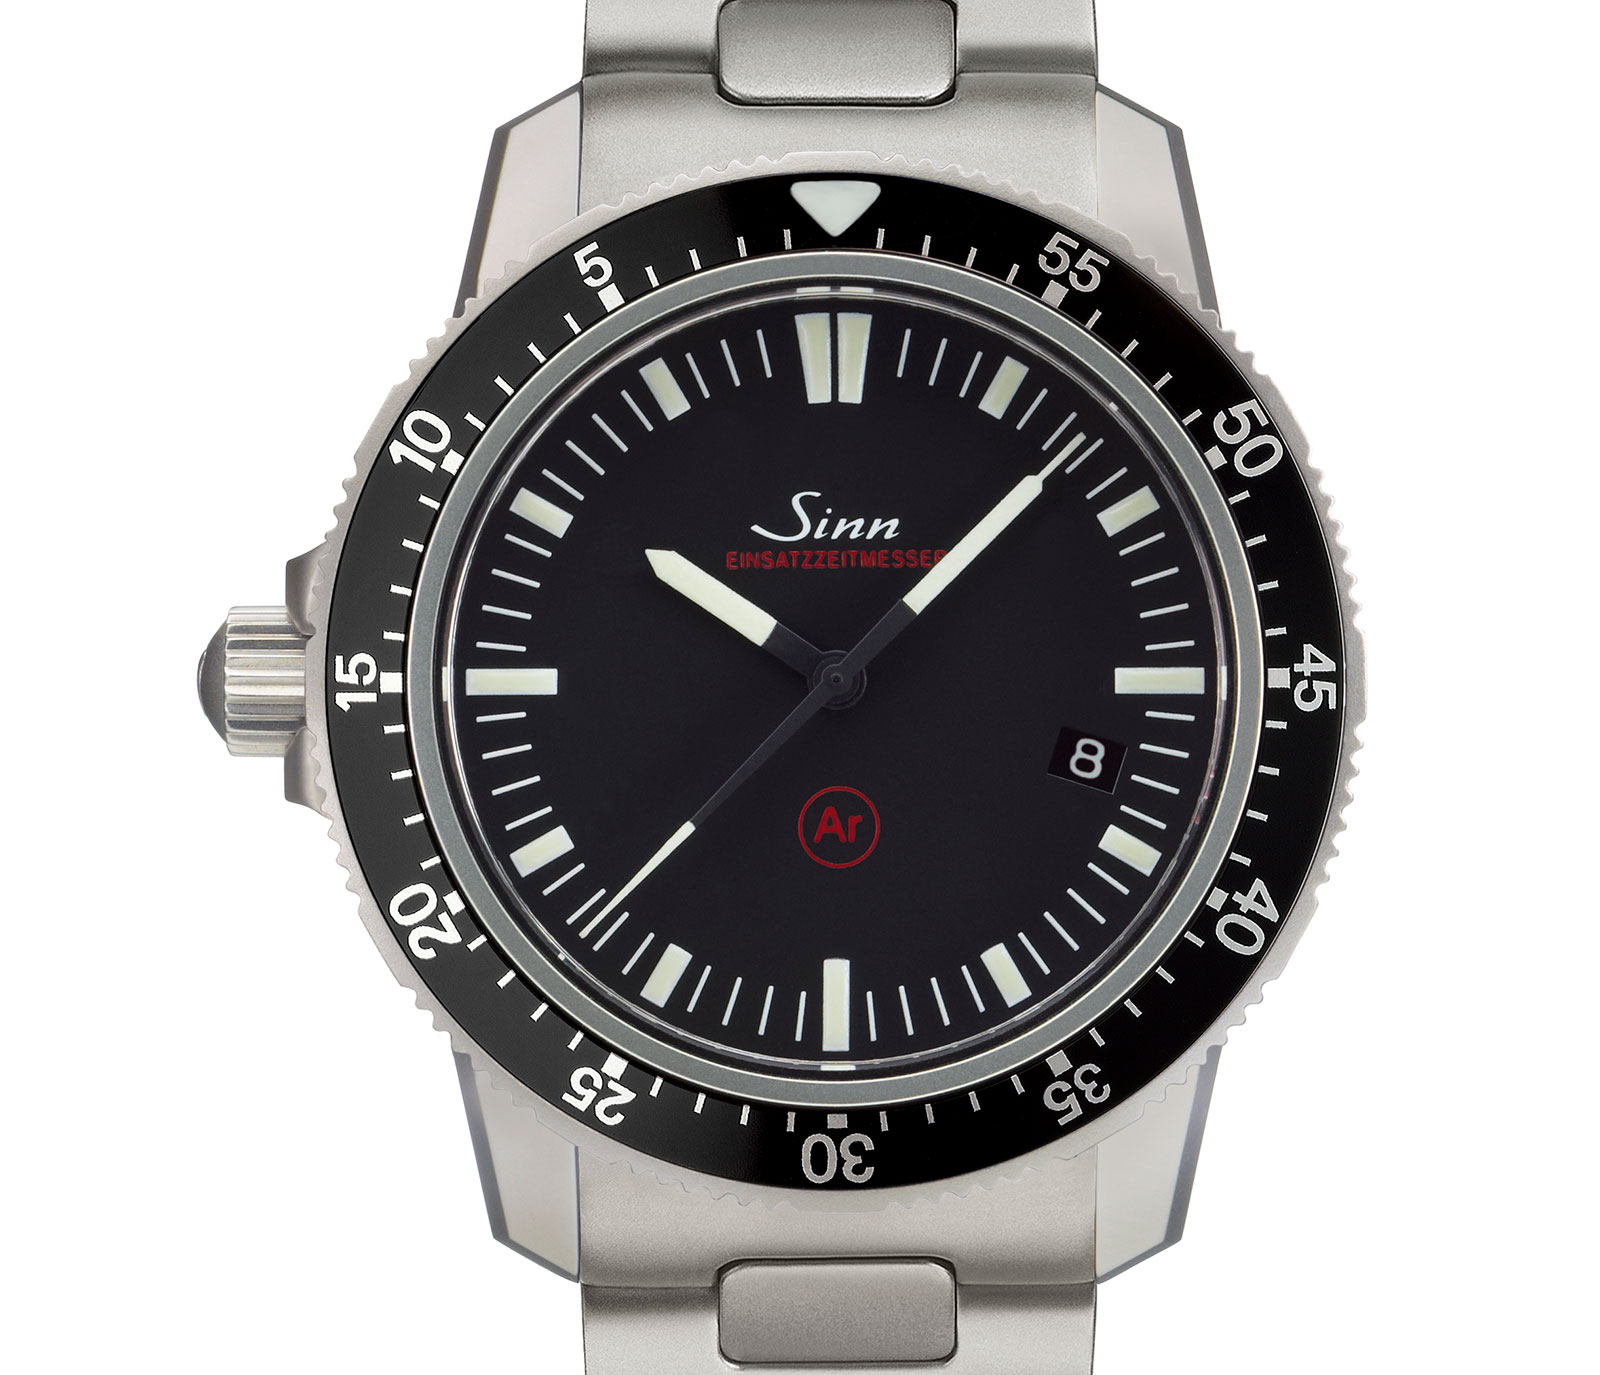 introducing-the-sinn-ezm-3f-the-no-nonsense-pilot-s-watch-with-price